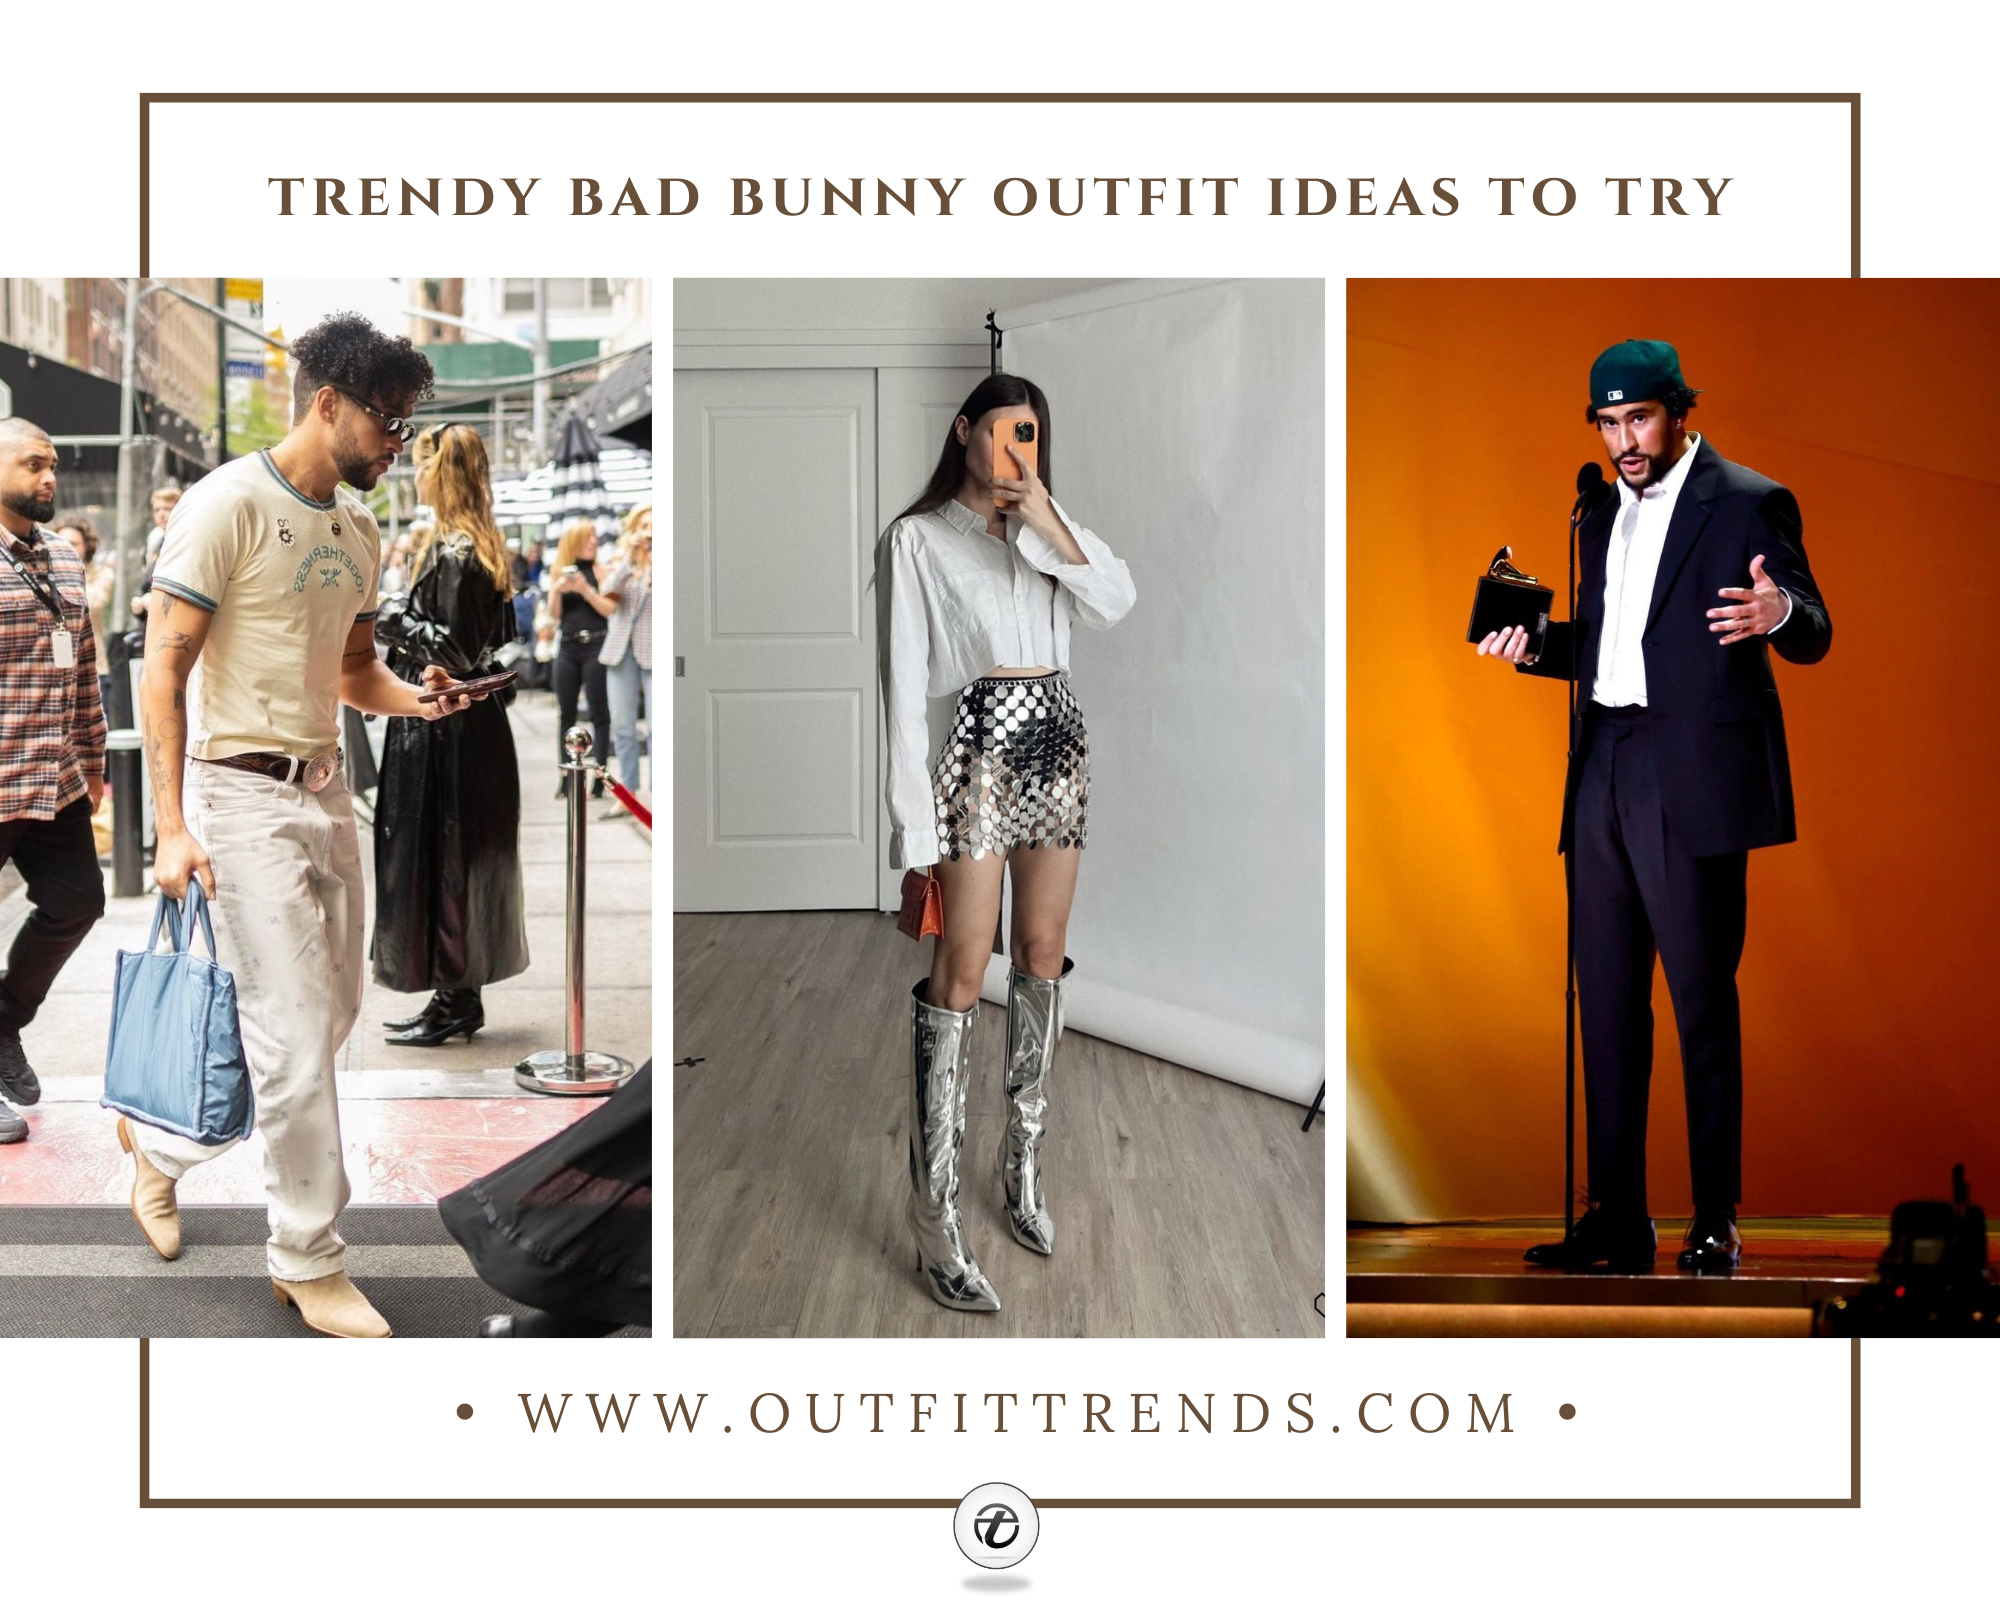 20 Bad Bunny Outfit Ideas for Party and Concerts